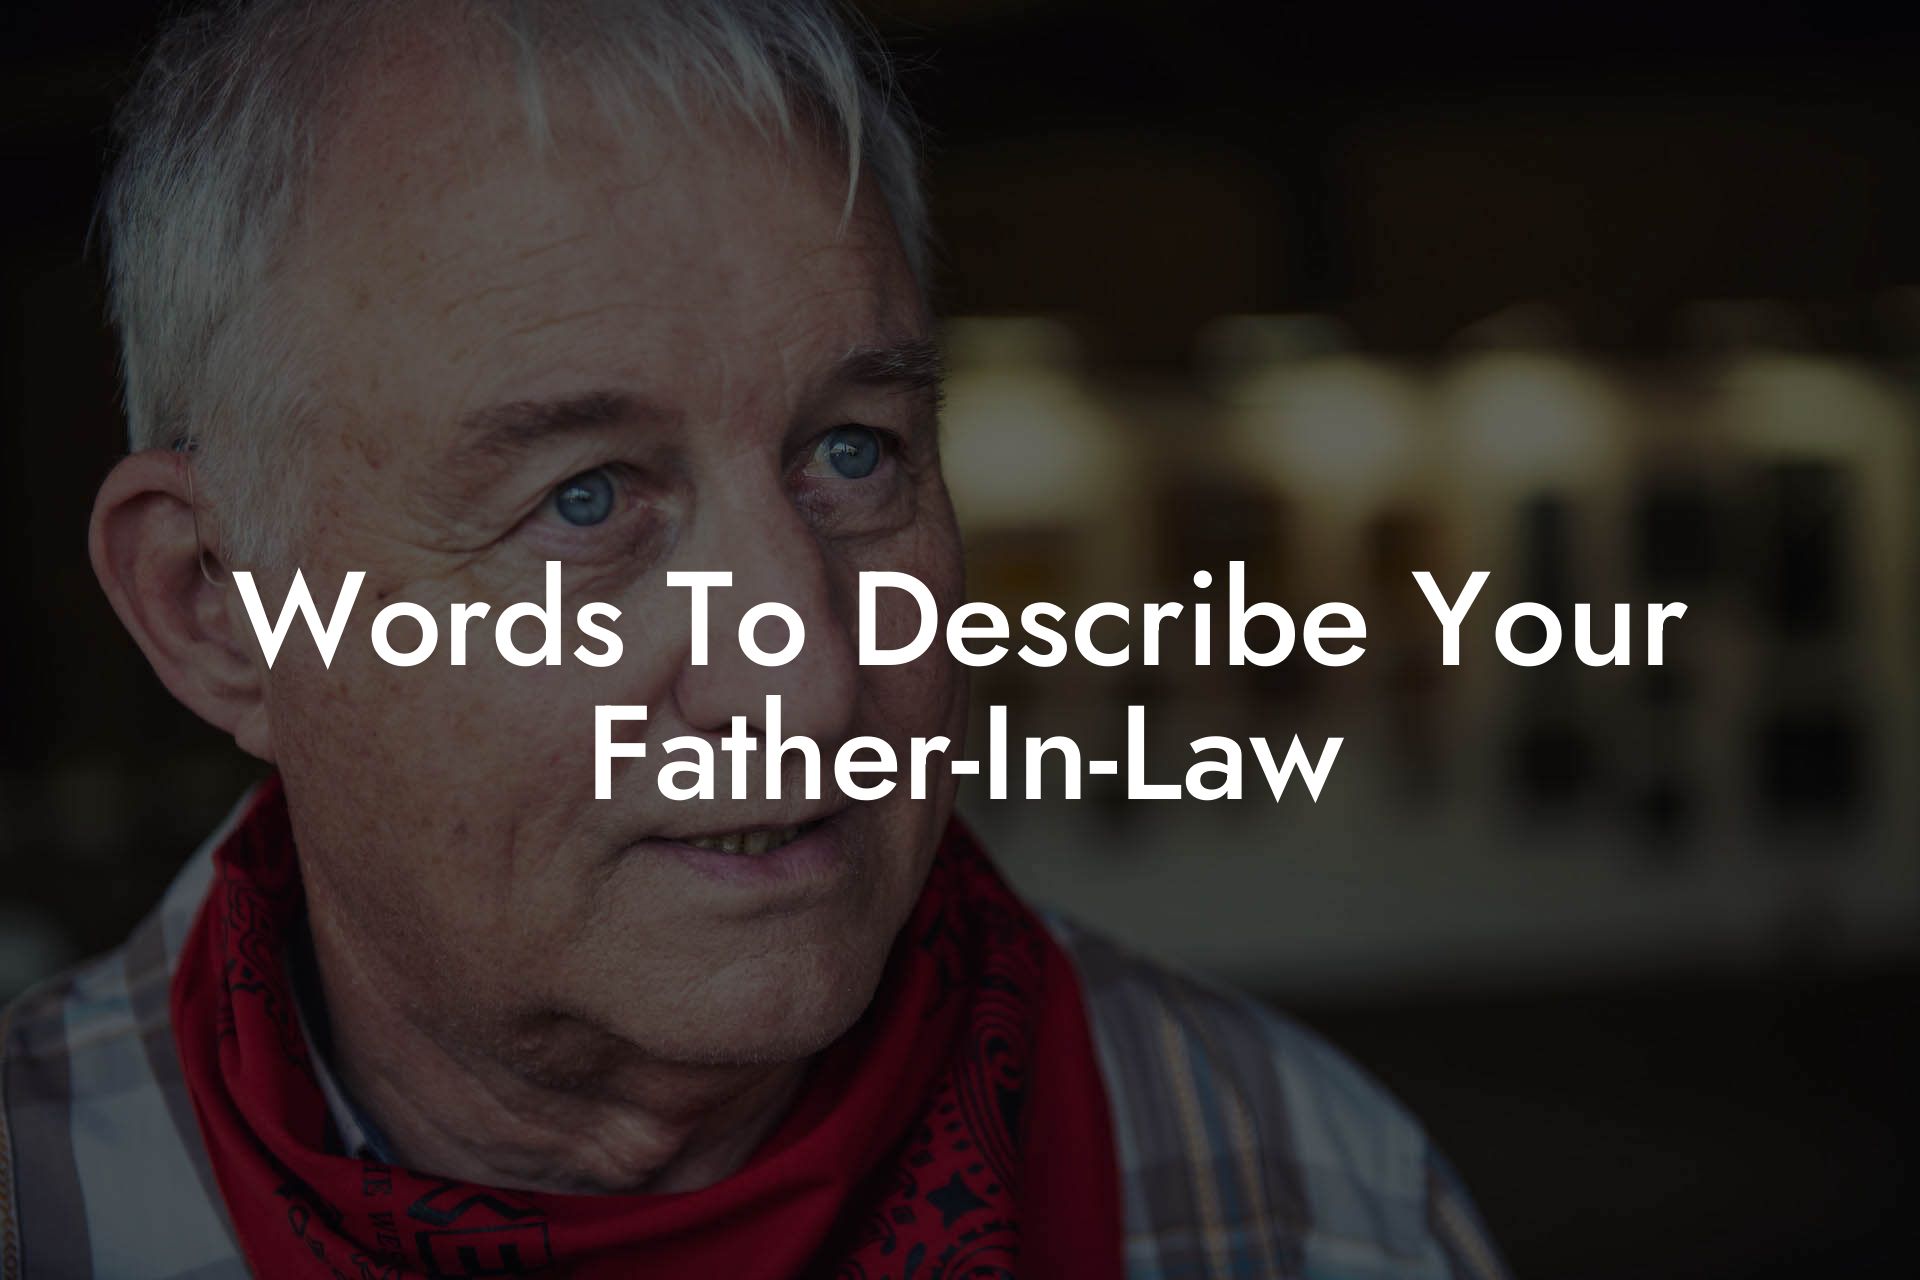 Words To Describe Your Father-In-Law